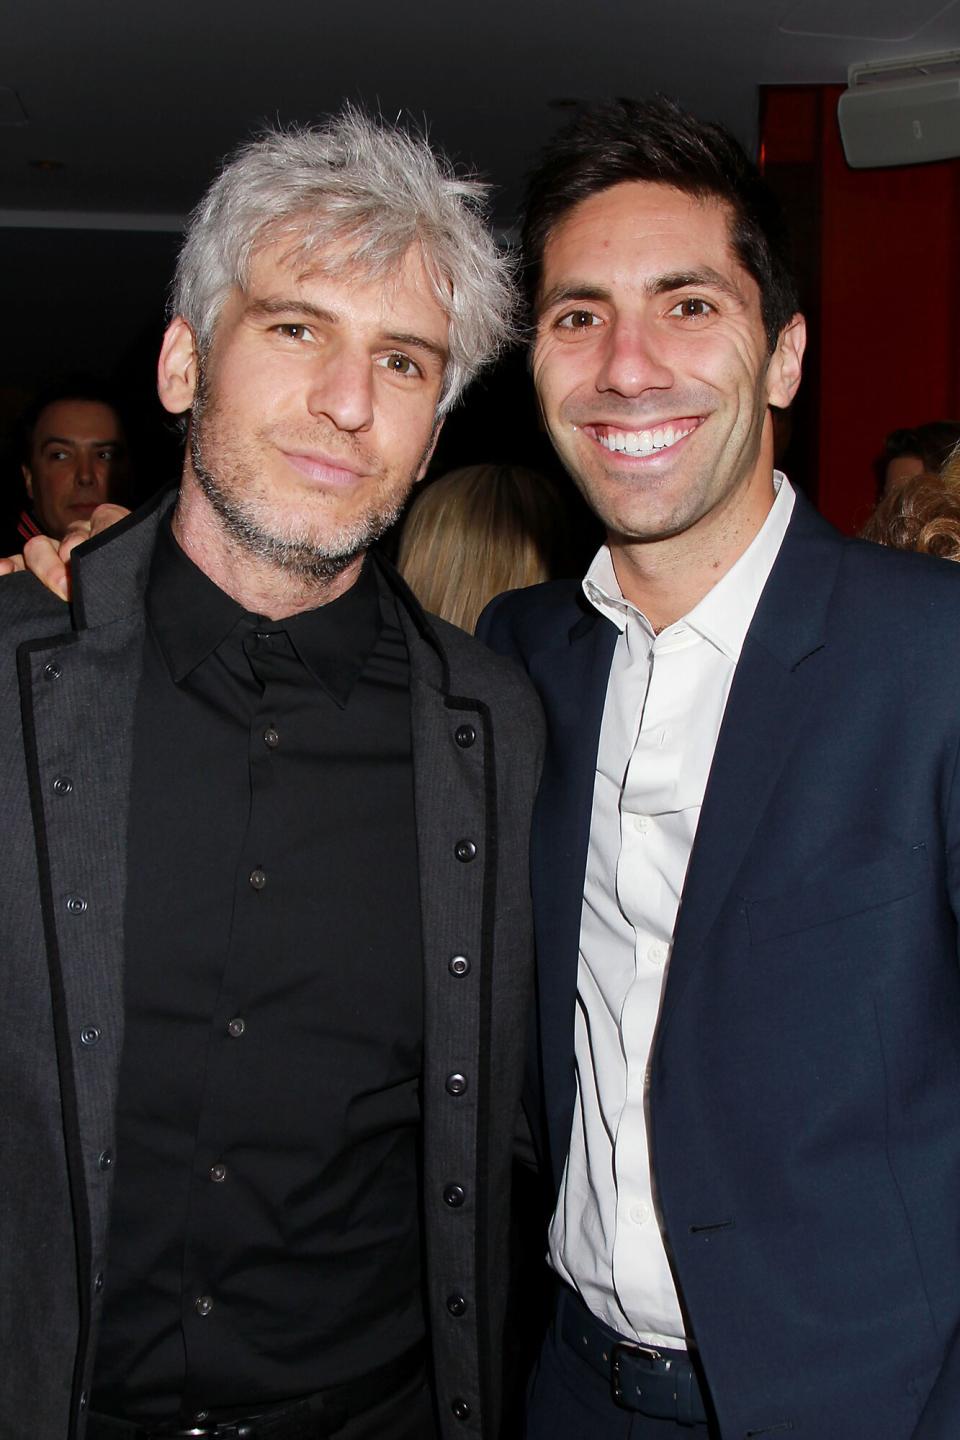 Max Joseph, Nev Schulman Paramount Pictures, Paramount Players, Tyler Perry Studios and BET Films Present the World Premiere of "Nobody's Fool" - After Party, New York, USA - 28 Oct 2018